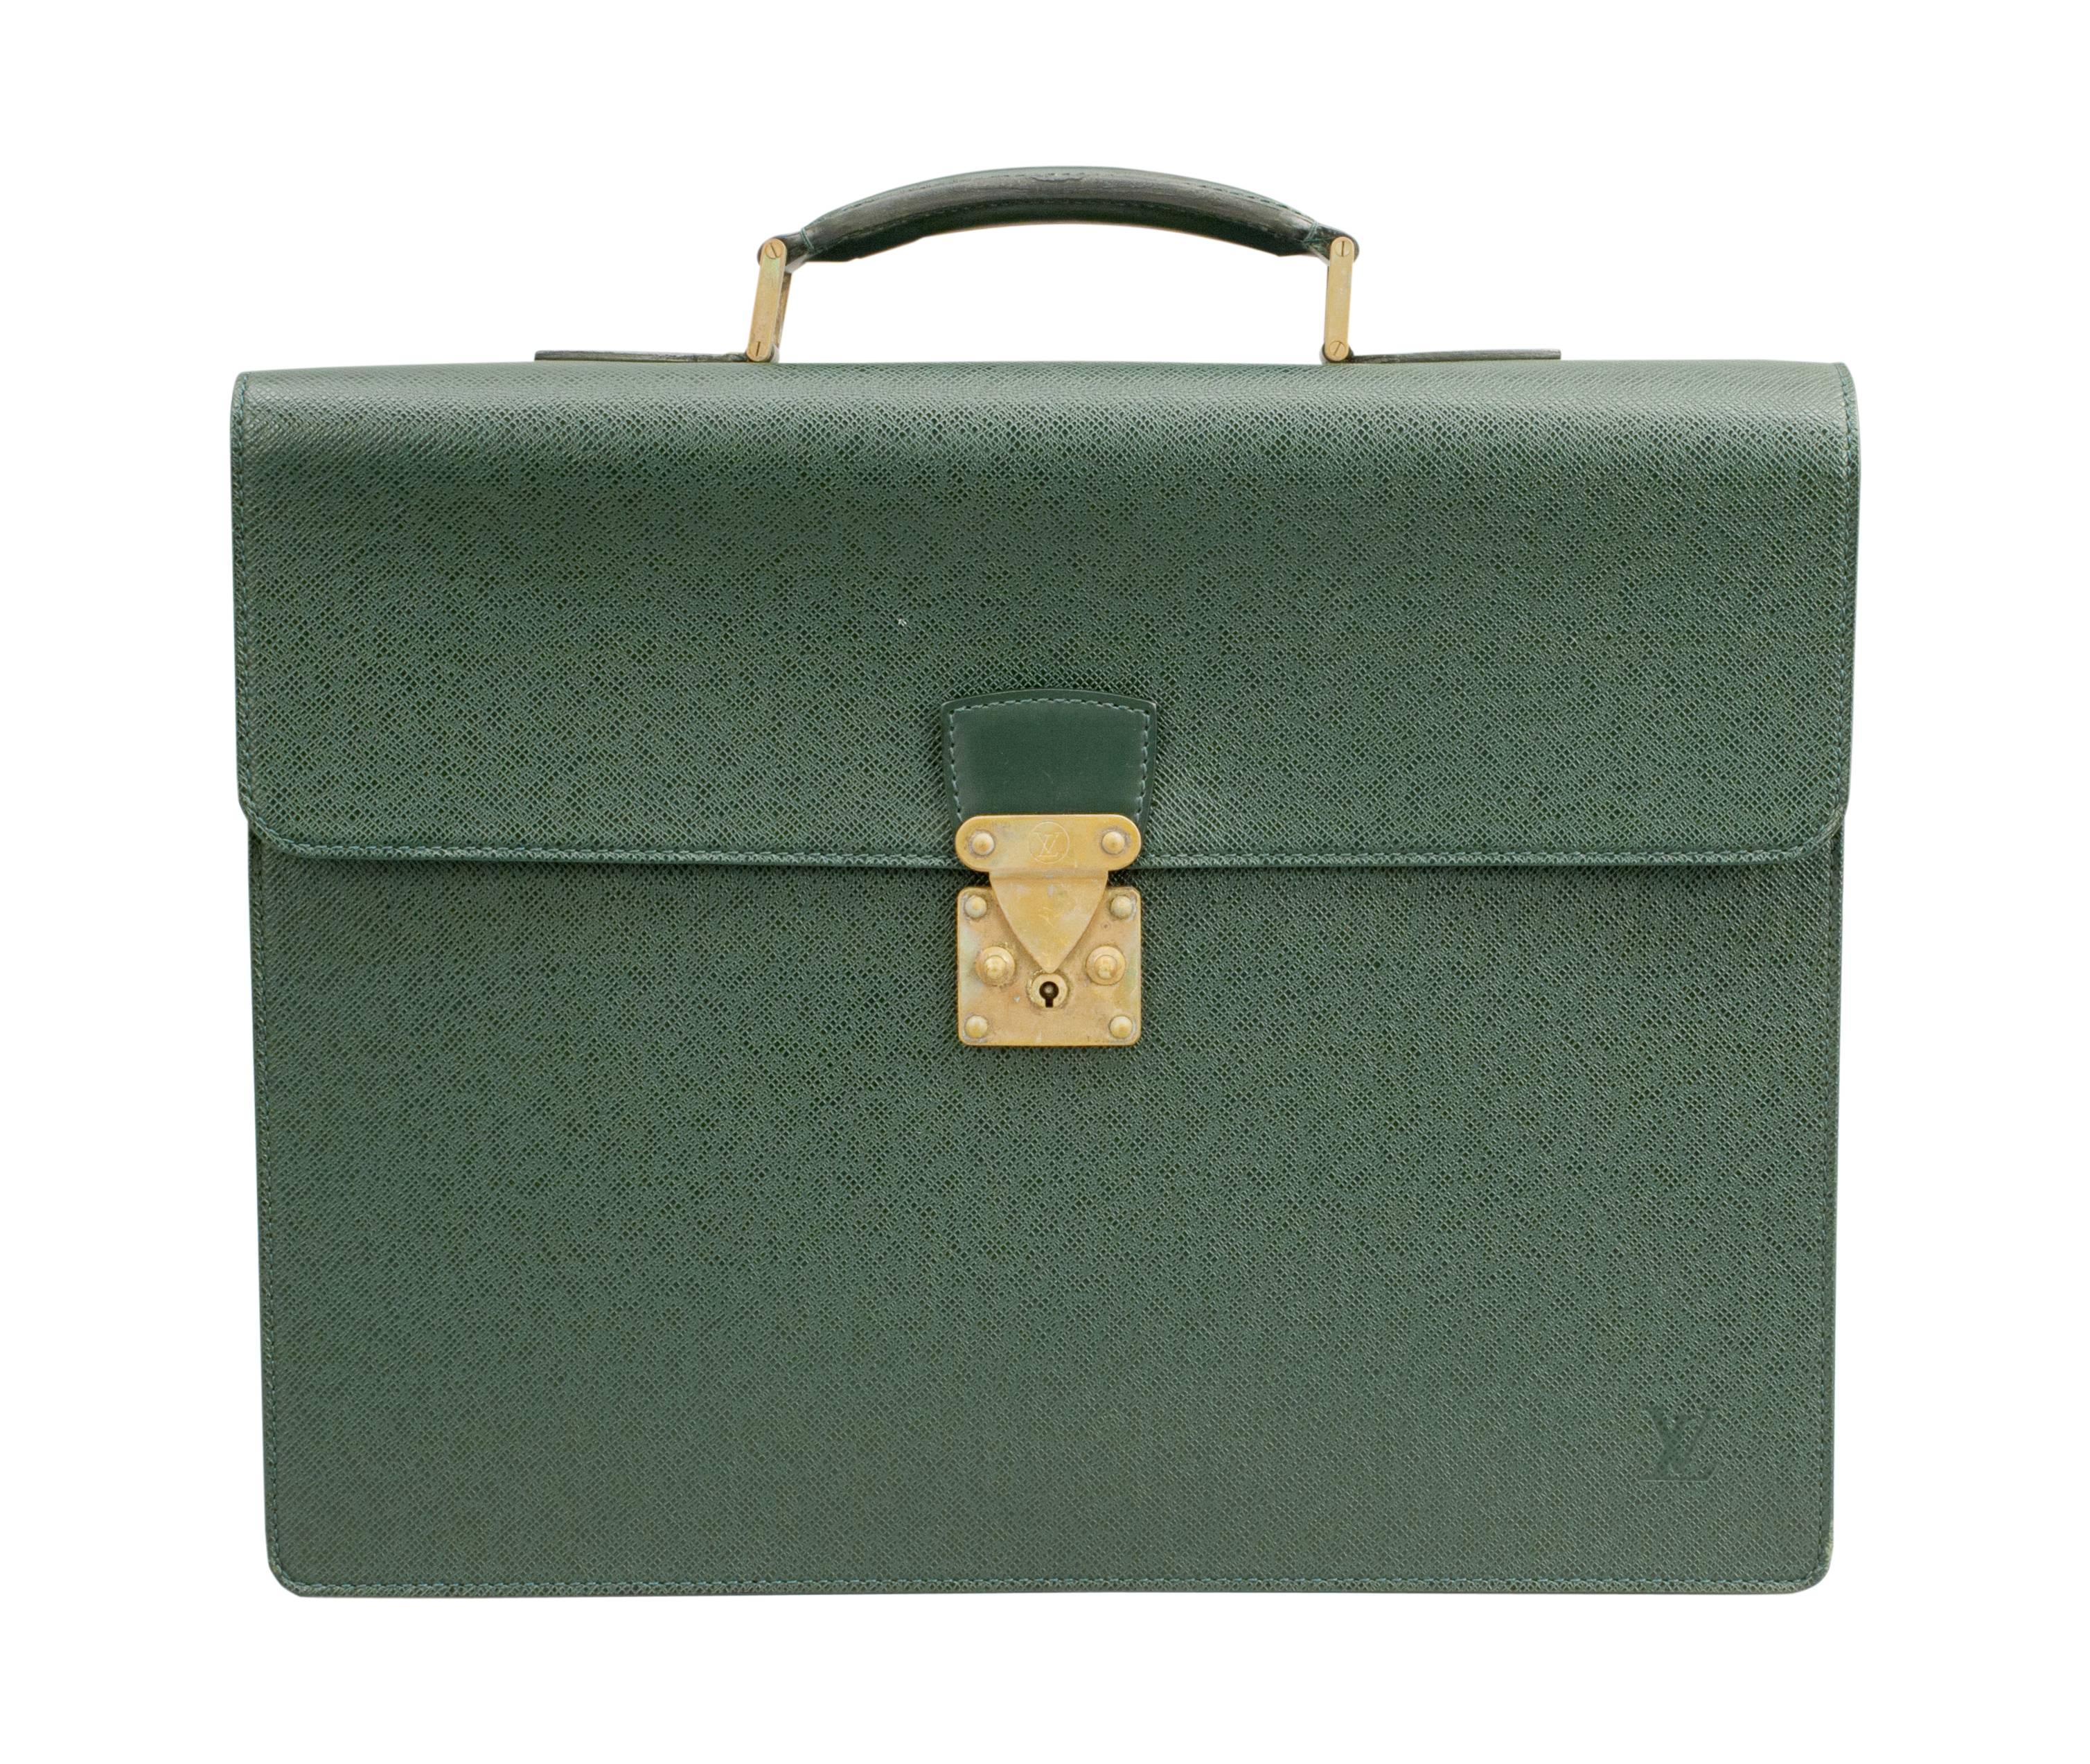 Louis Vuitton document case.
An original stylish Louis Vuitton monogrammed expandable briefcase. The case is made in green leather and features a sturdy reinforced leather top handle, frontal flap with brass press lock closure. The lock with